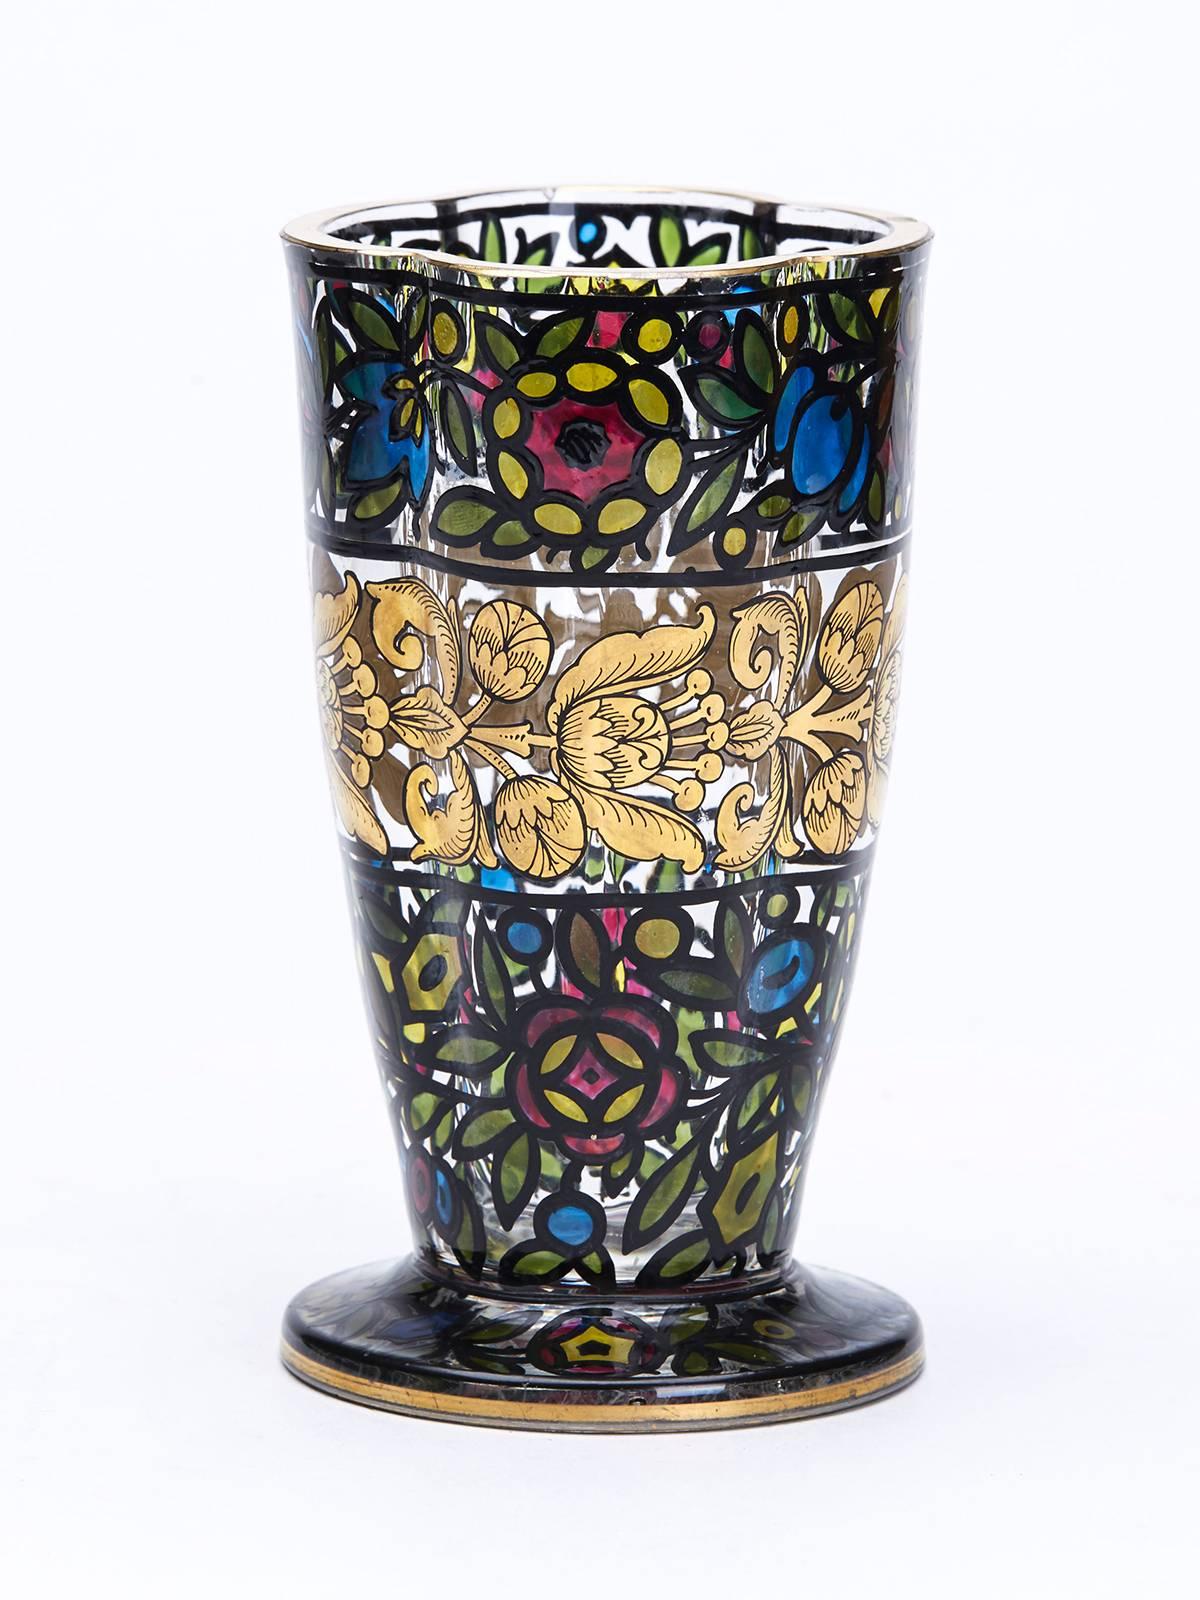 A superb Art Nouveau Bohemian art glass vase by Julius Mulhaus & Co, Haida. The thickly made shaped rounded glass vase is decorated in a stained glass window style with floral designs picked our in translucent colors within a black outline with an